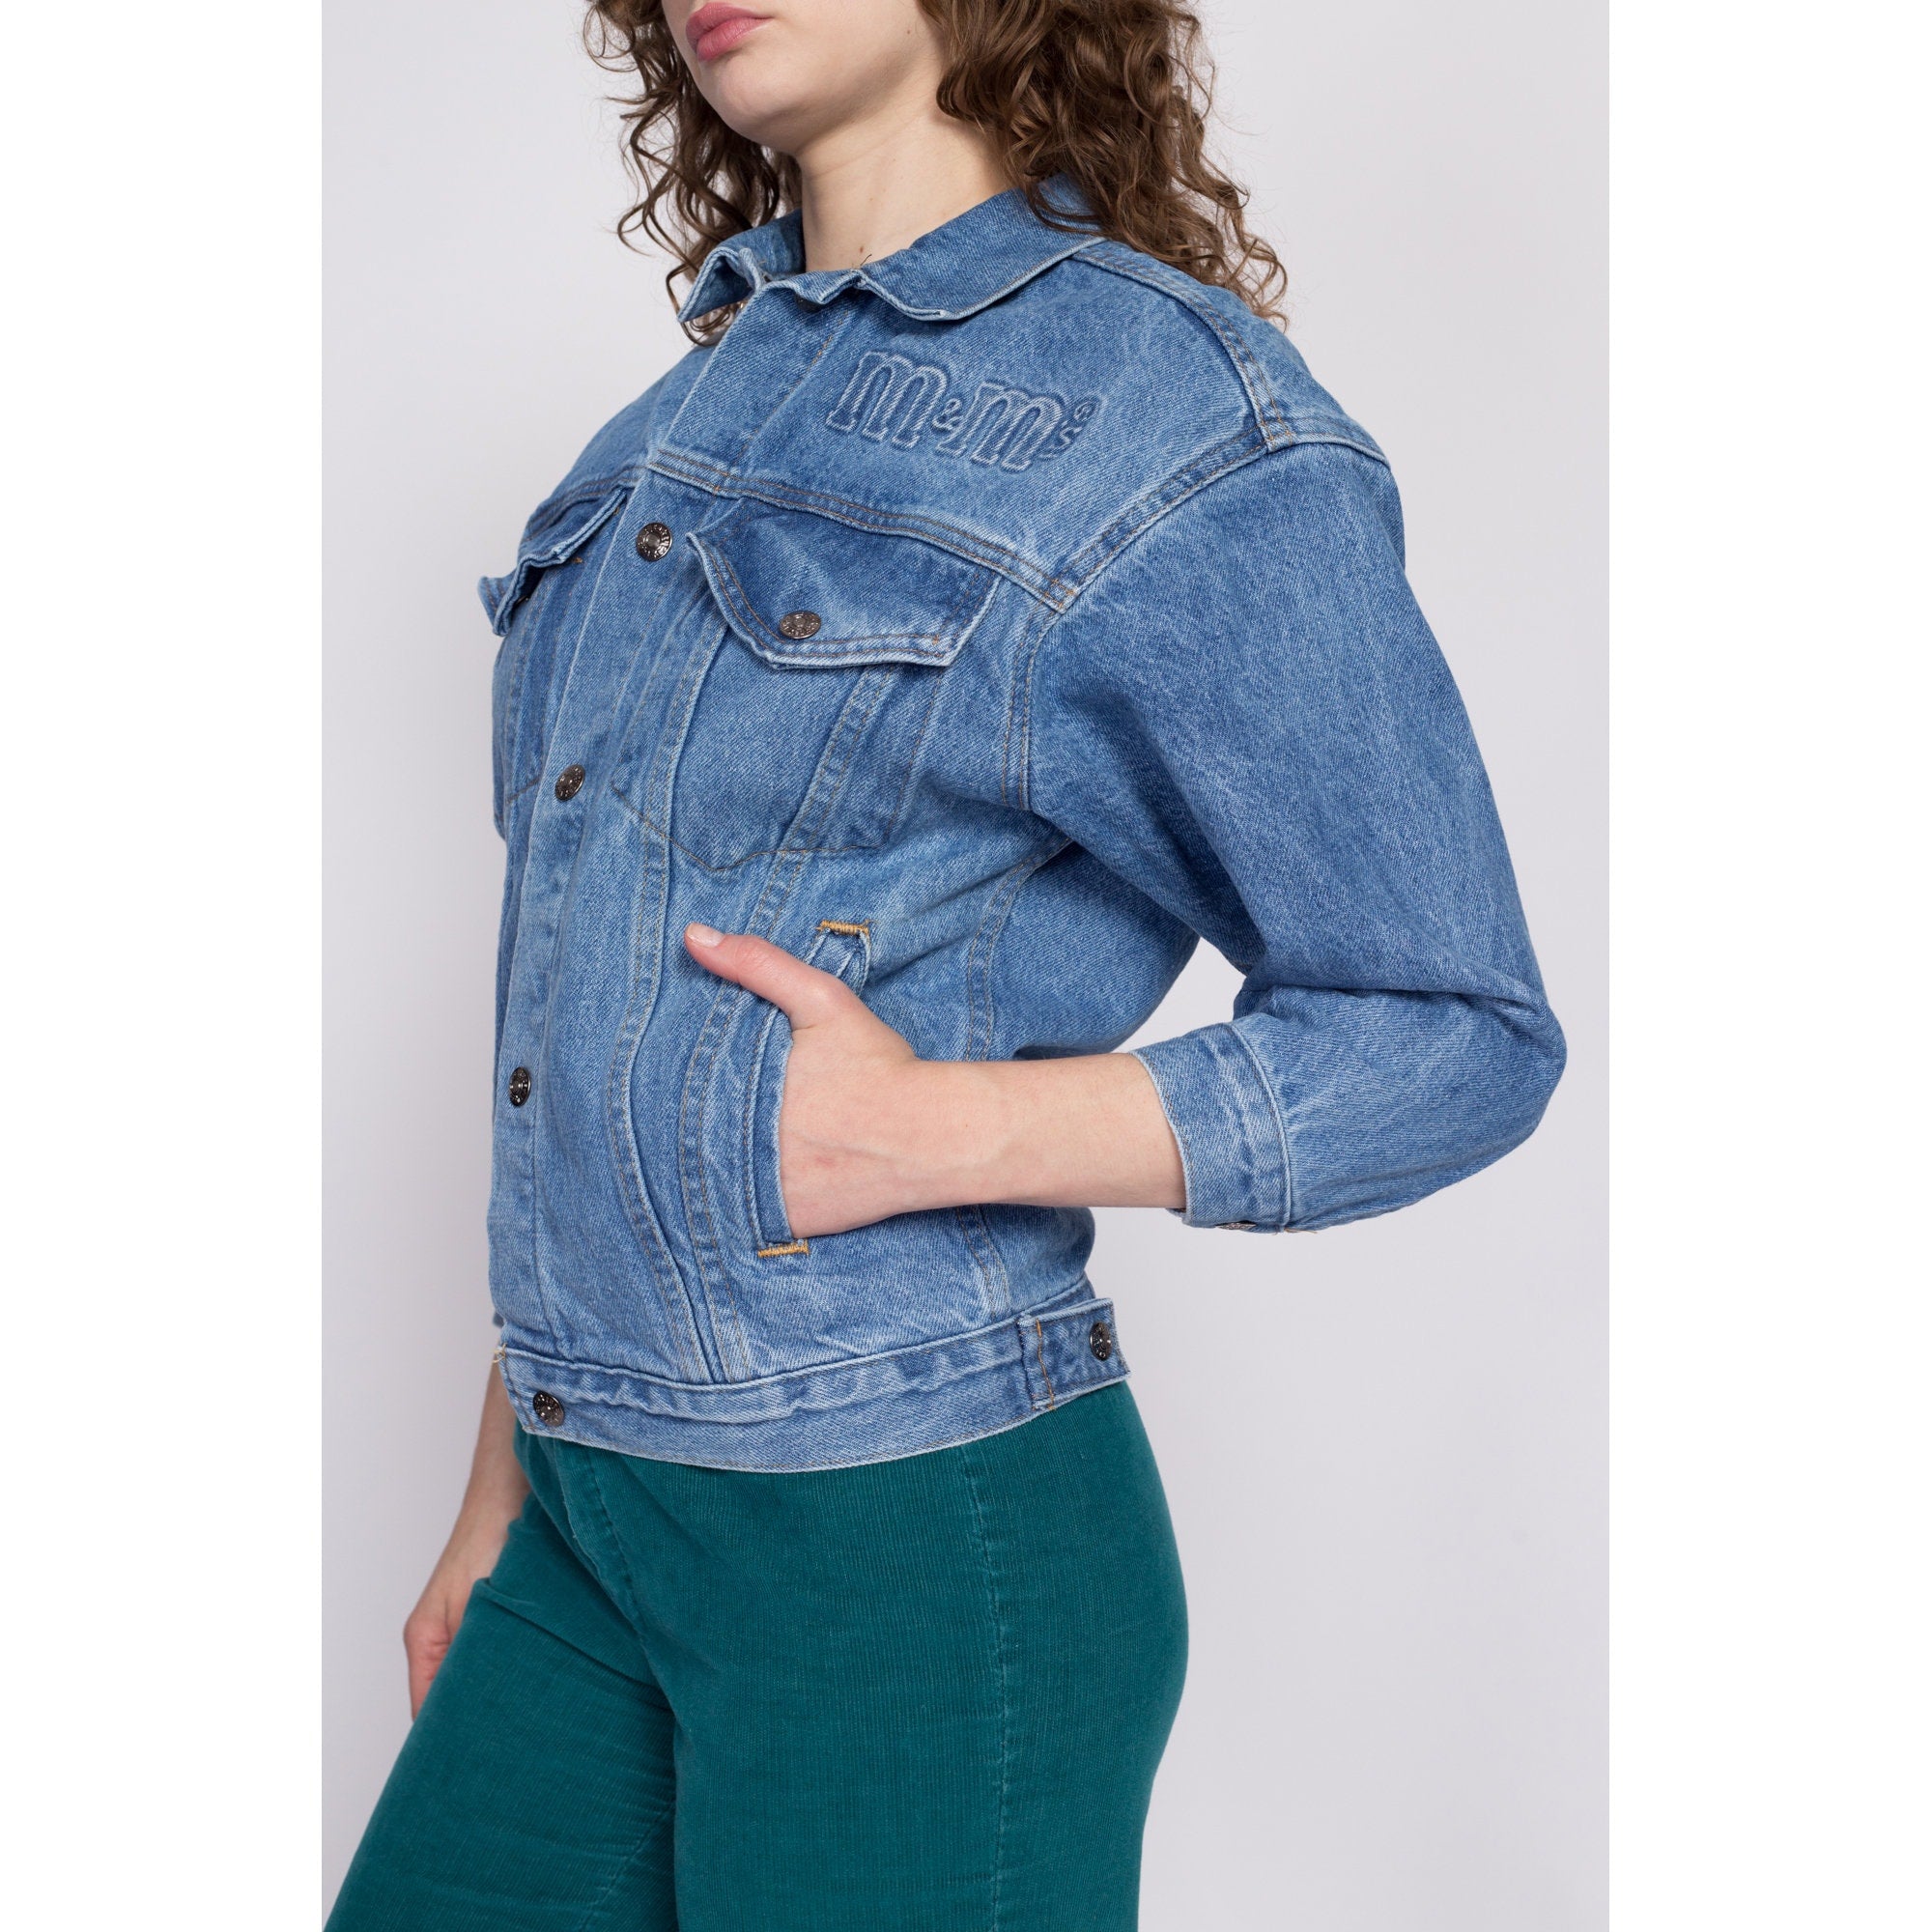 Men's Chucky Placement Denim Jacket For Women – Members Only®